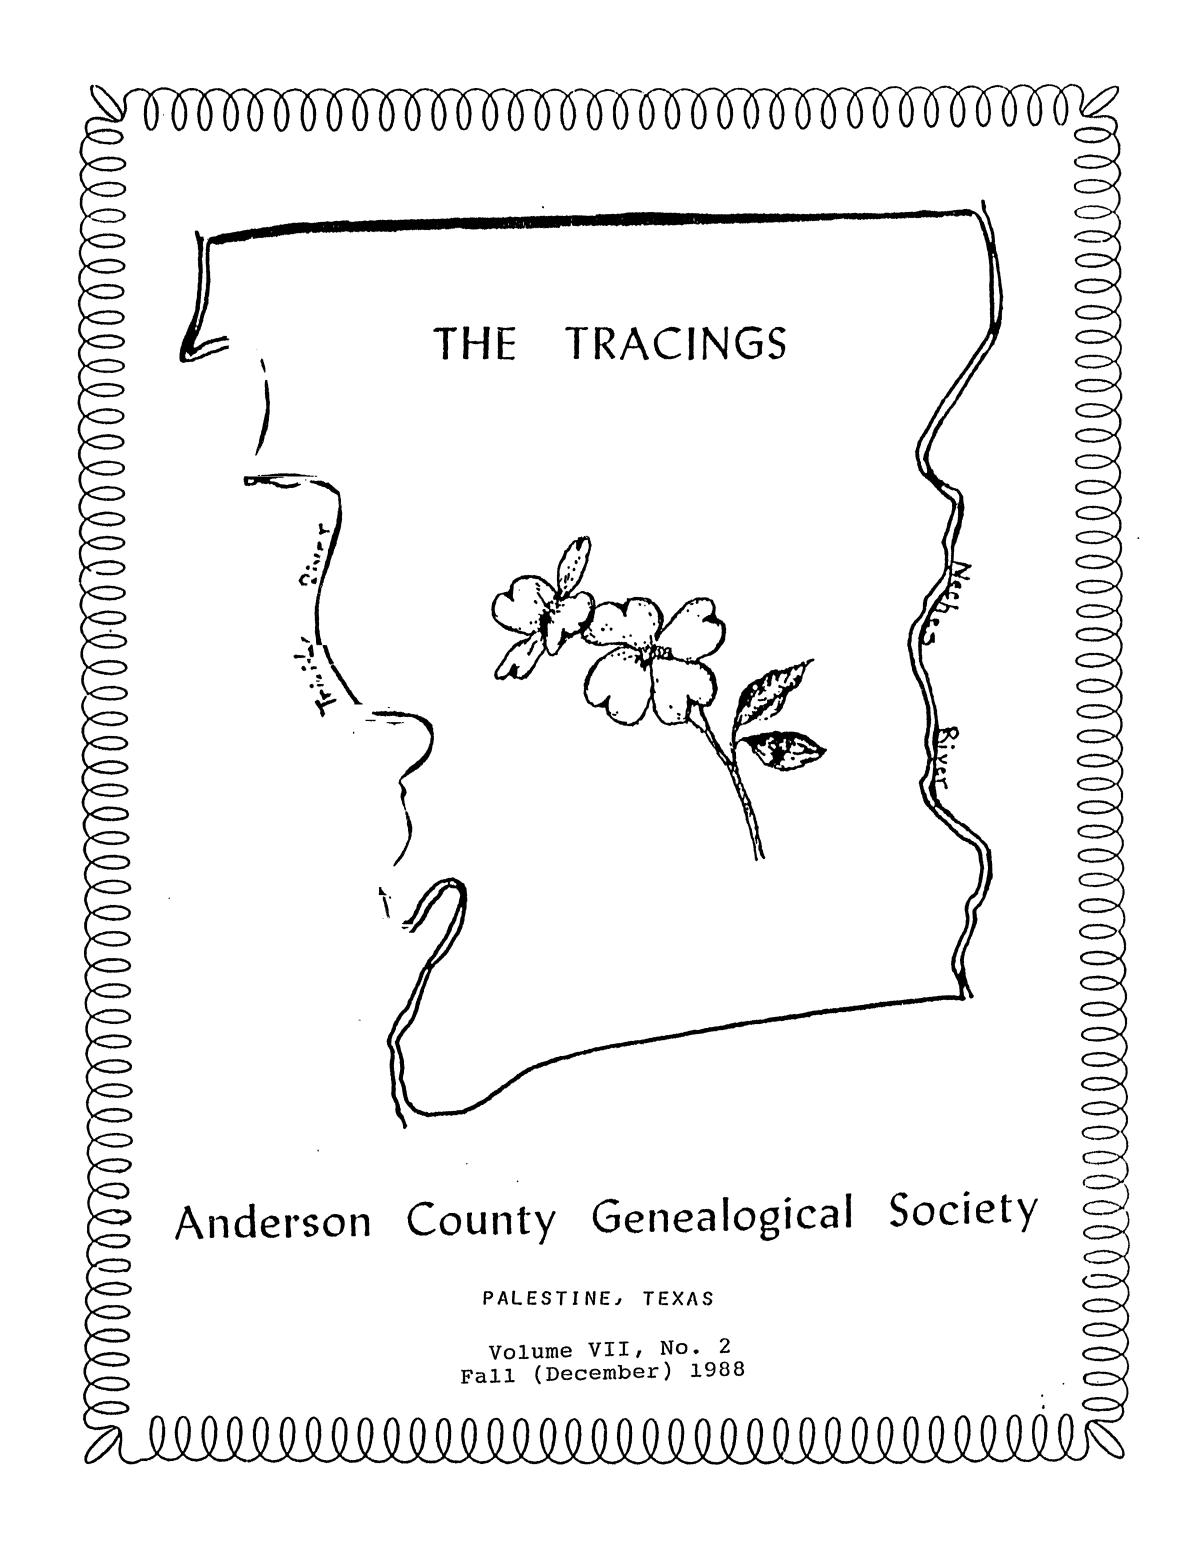 The Tracings, Volume 7, Number 2, Fall 1988
                                                
                                                    Front Cover
                                                